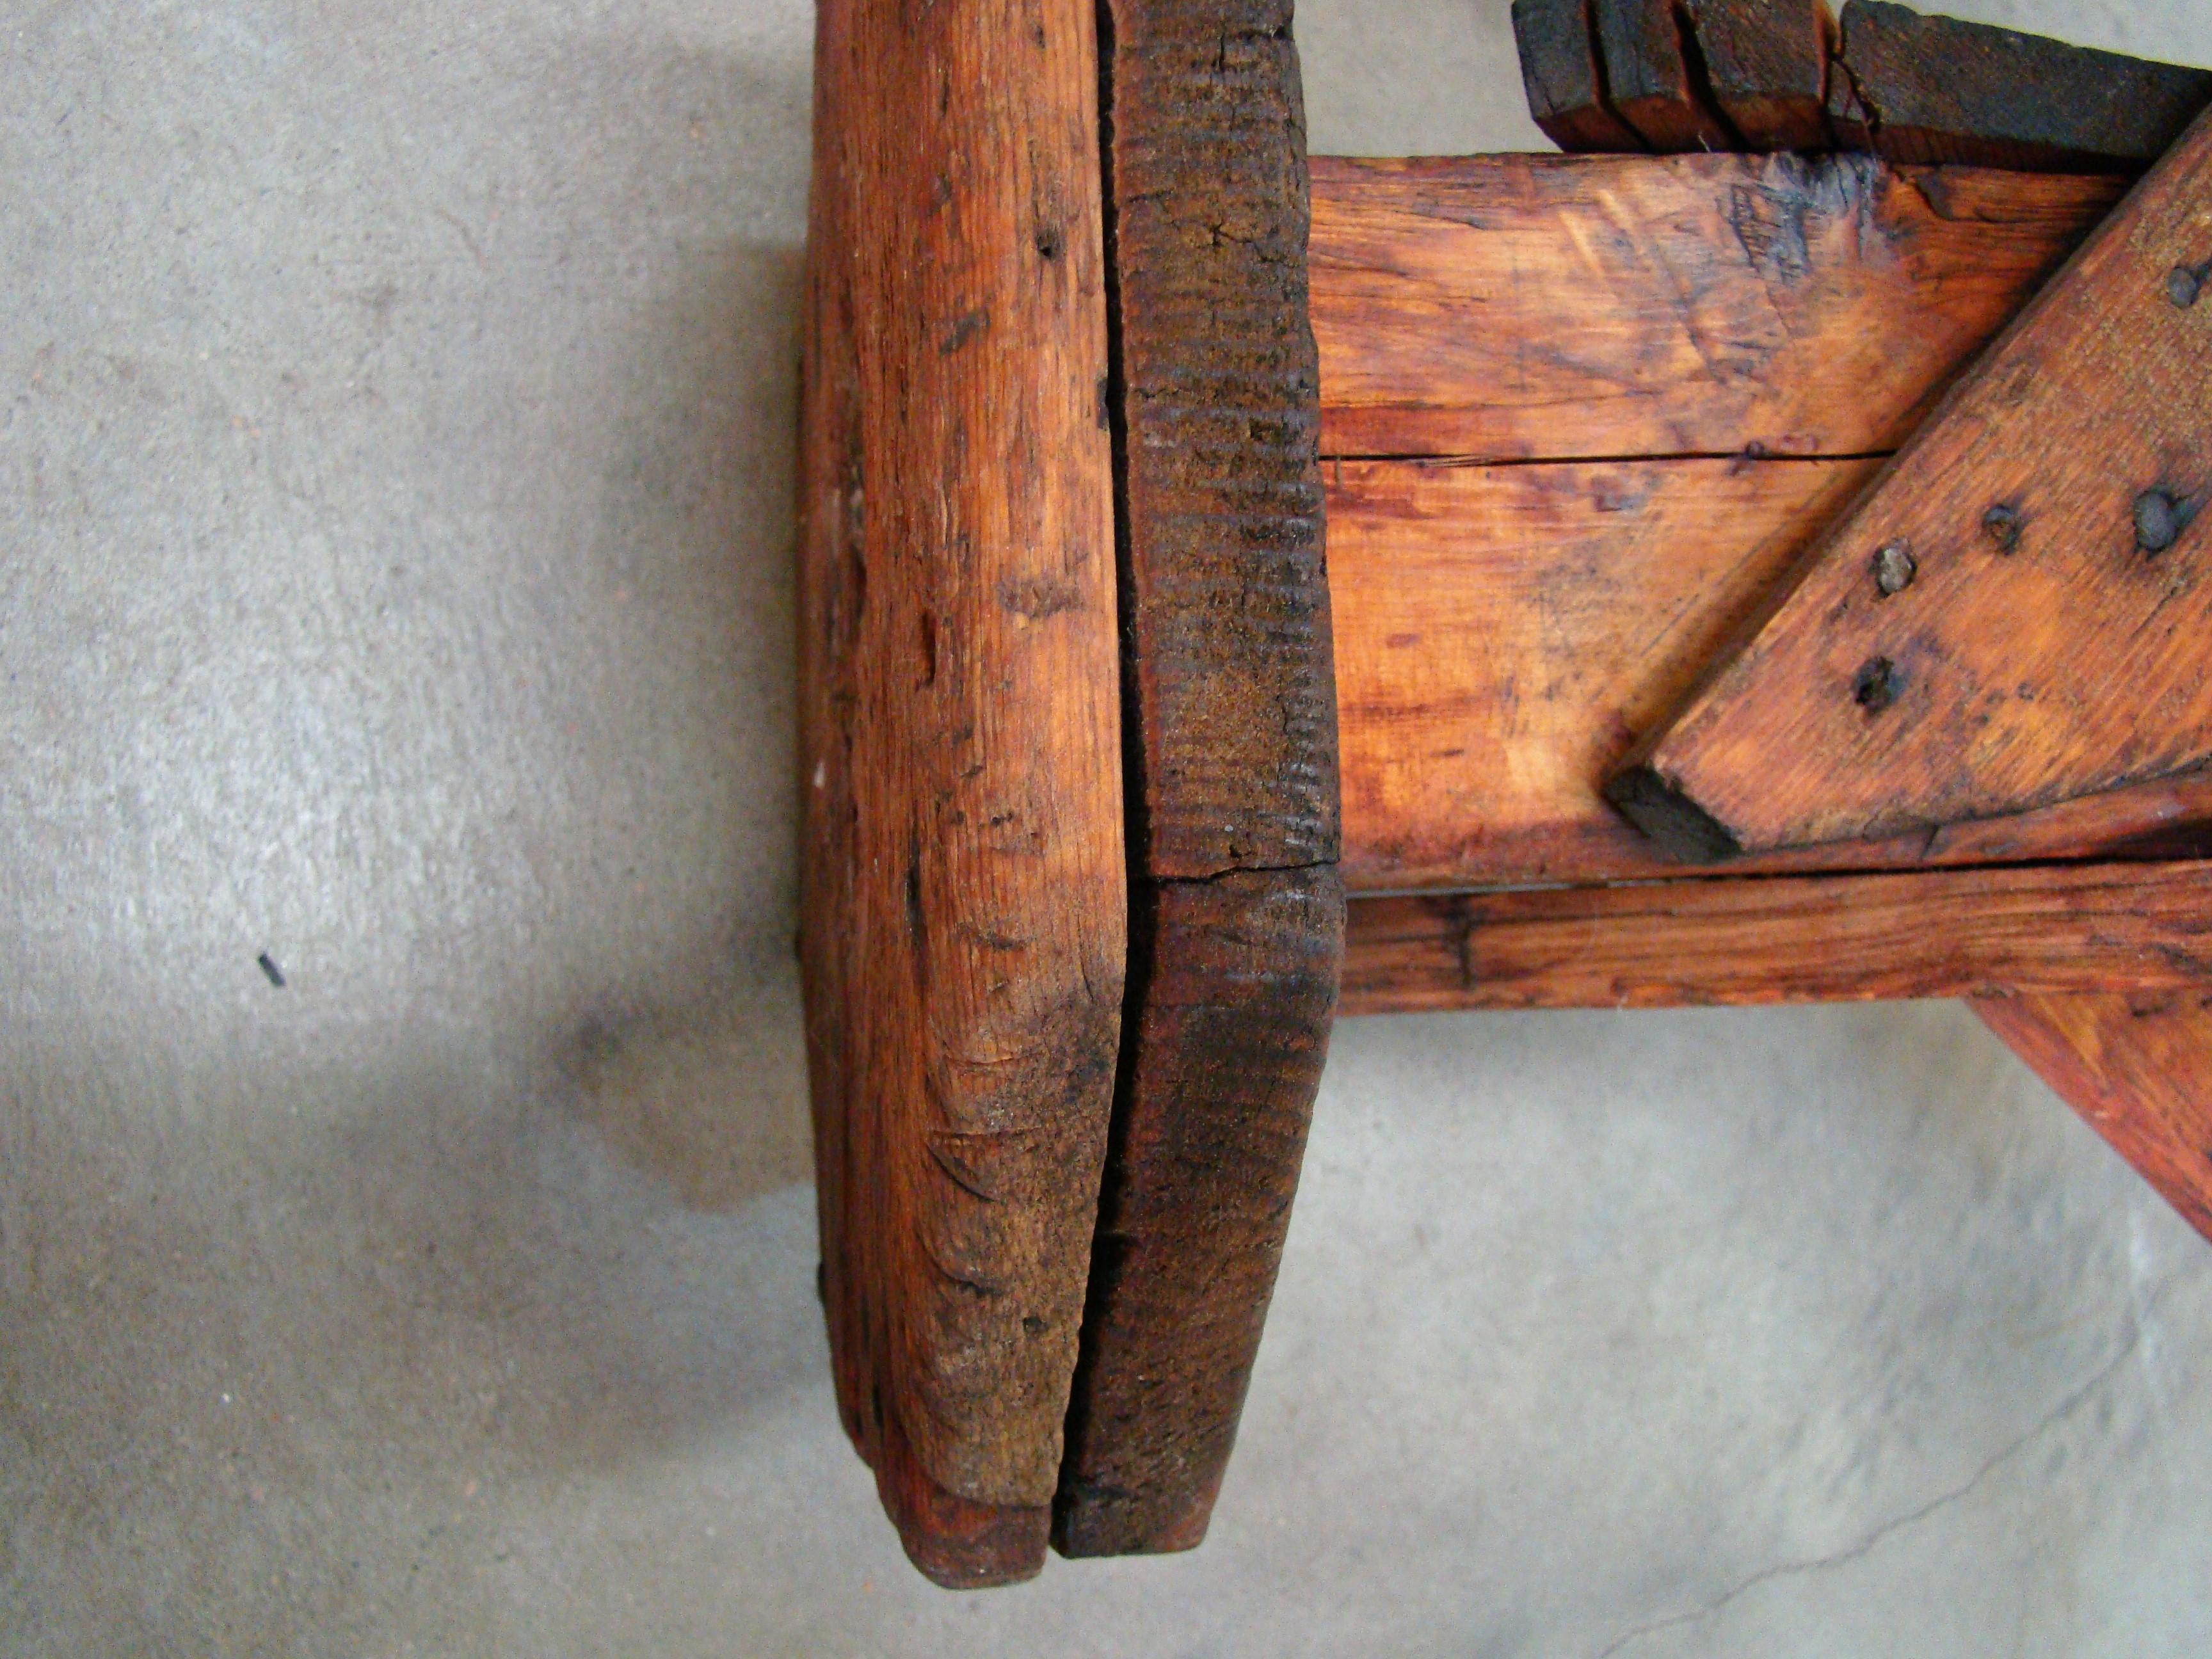 American Antique Wooden Milking or Workmans Stool